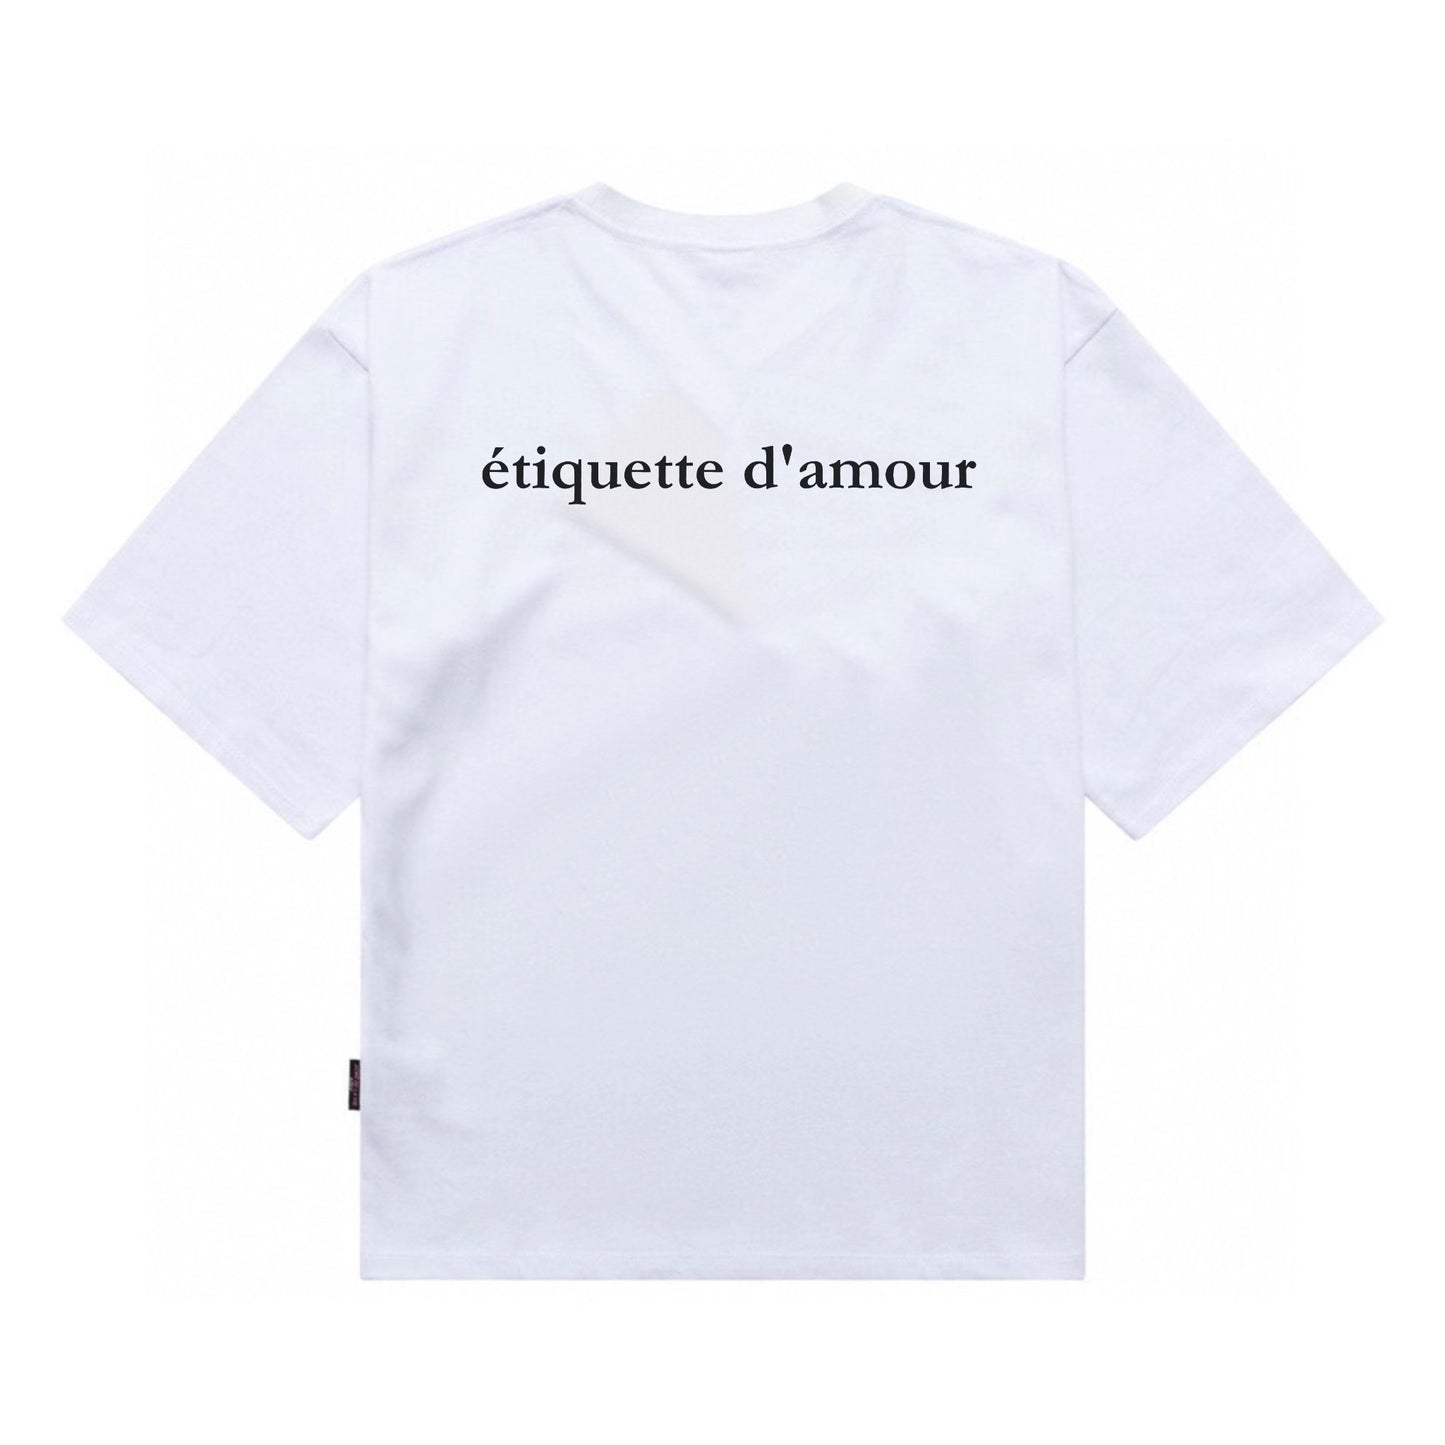 Etiquette Oversized T-Shirt - [0071] Triangle Pink Man